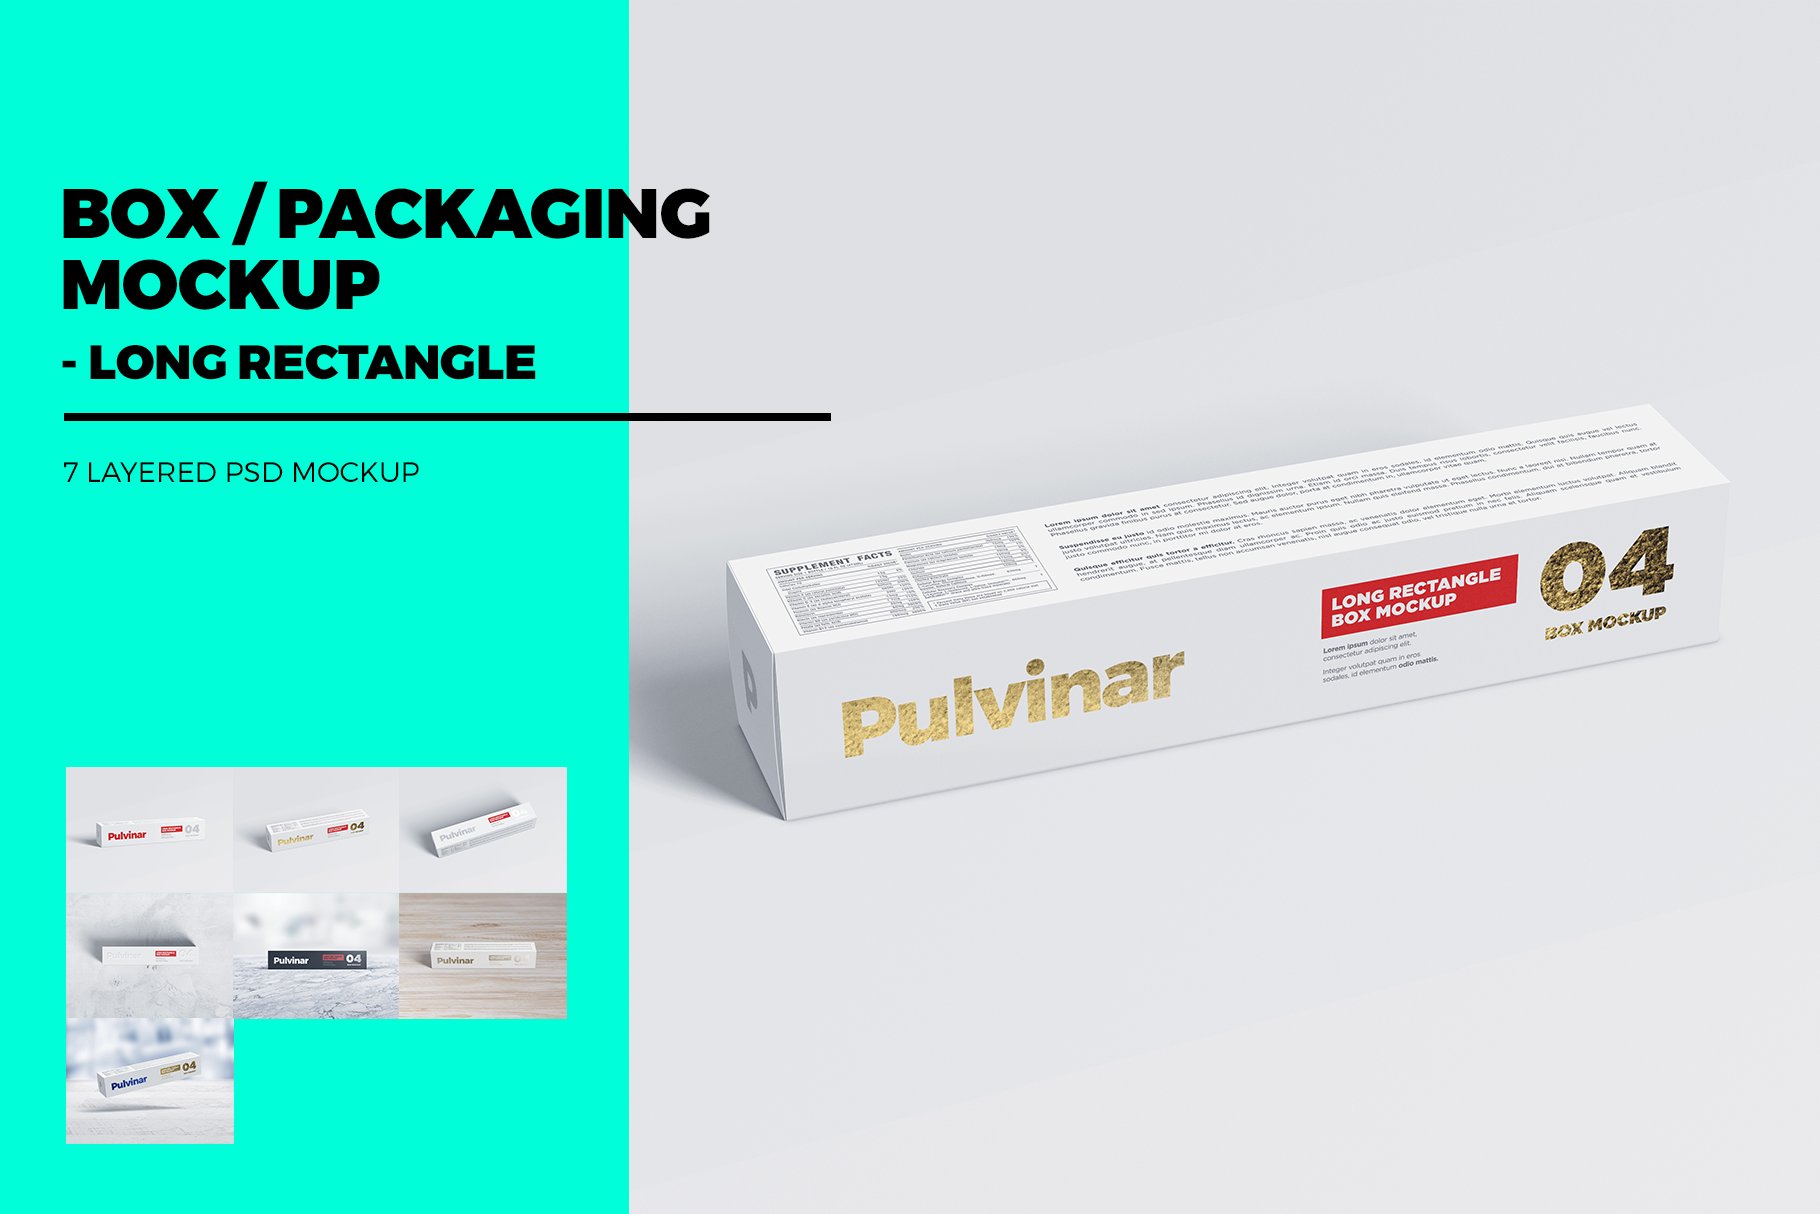 Box / Packaging - Long Rectangle cover image.